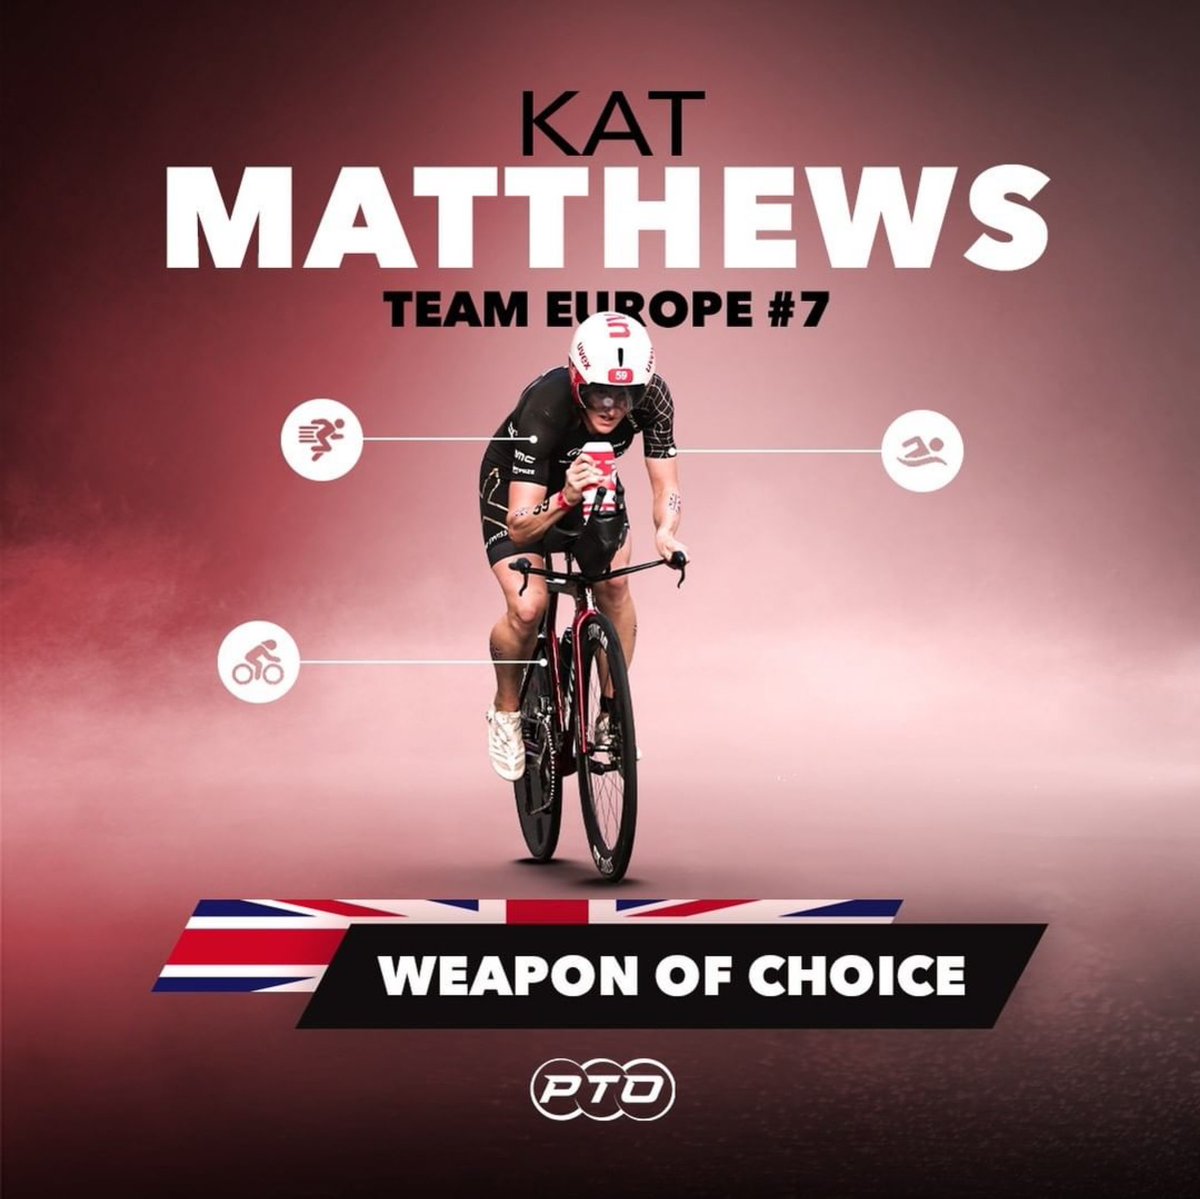 BMC Pro Triathlon Team p/b 2XU on Twitter: "From @protriorg ・・・ @katr_matthews made her first appearance of the 2021 season Challenge Gran Canaria, finishing a creditable fourth she aim